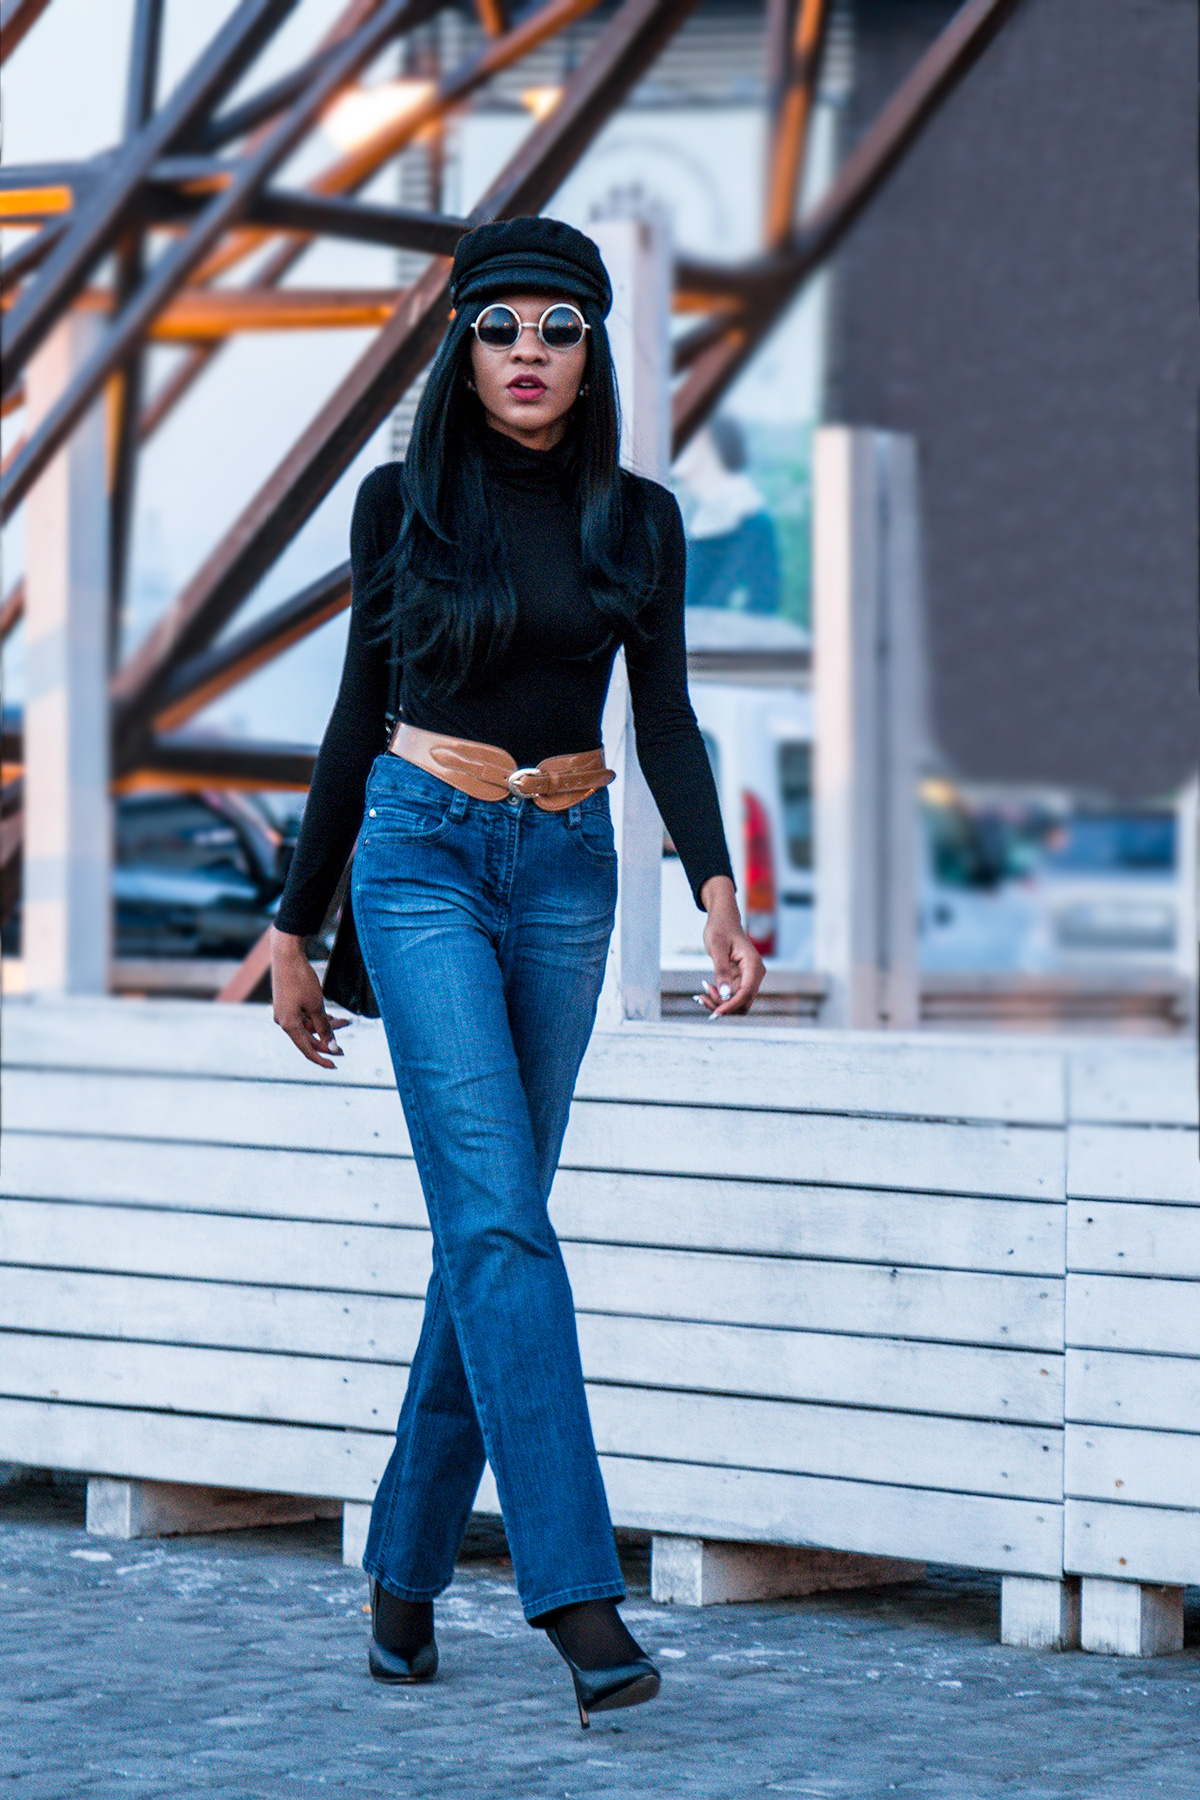 Retro Chic Look in Wide Leg Jeans